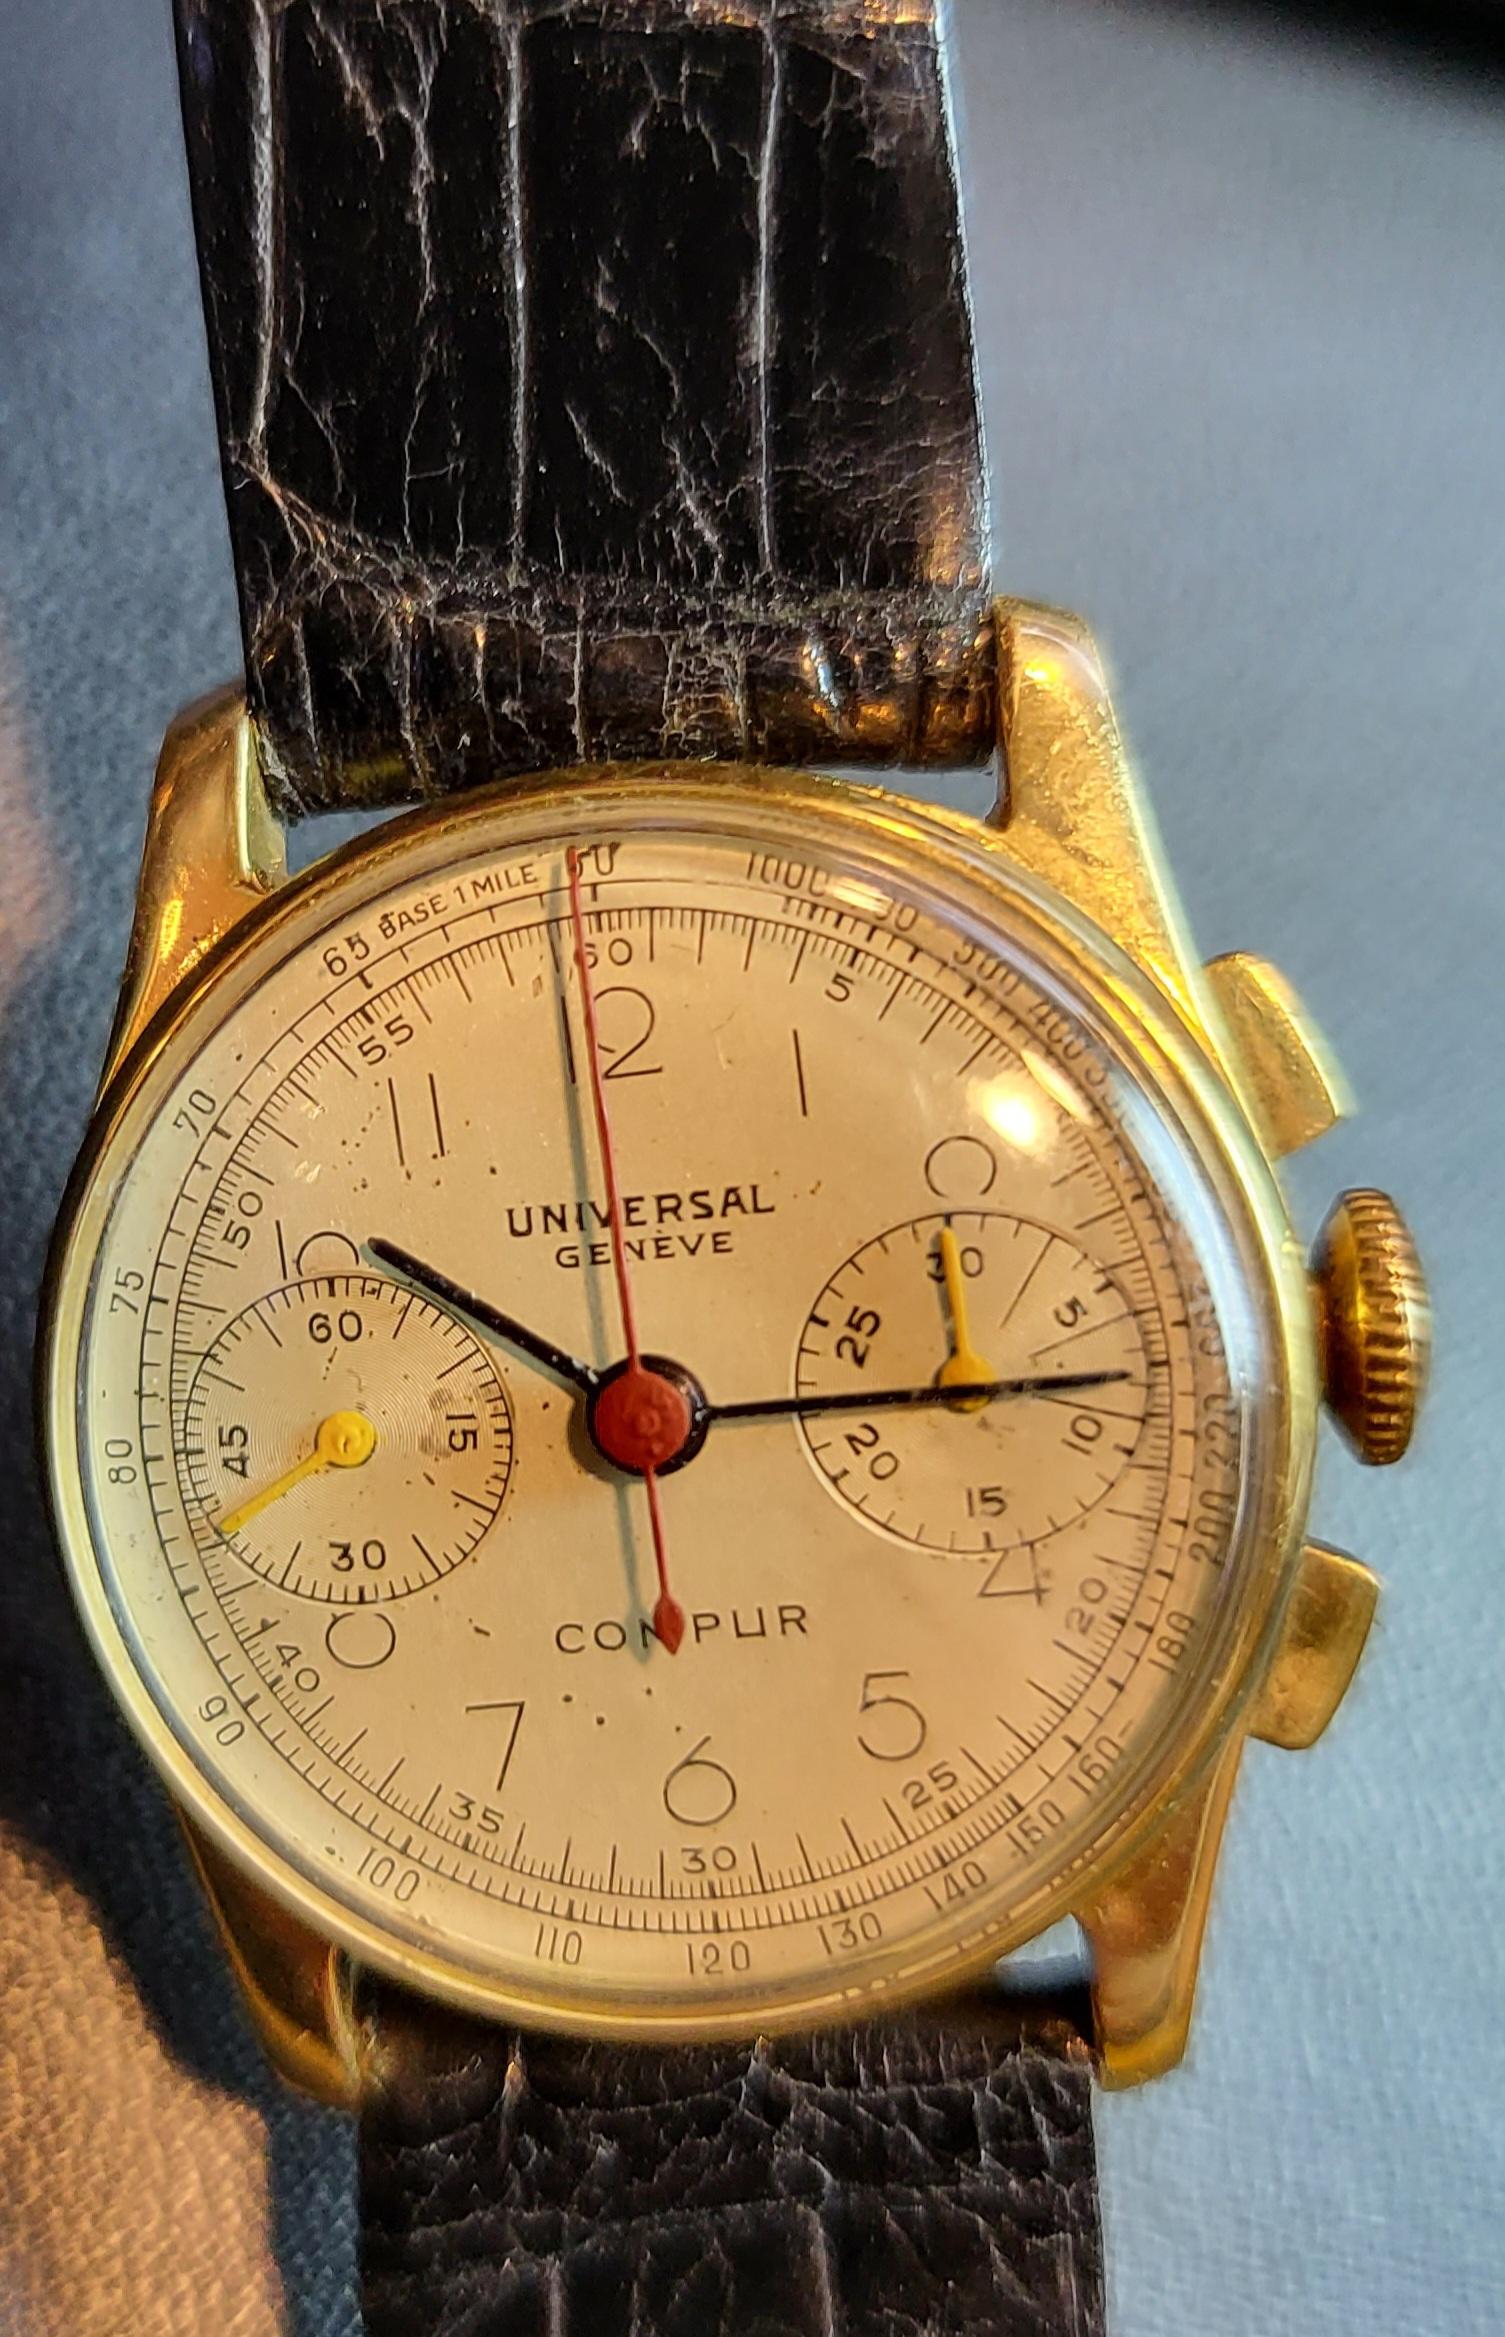 18kt Yellow Gold Universal Geneve Chronograph Watch, Extremy Rare For Sale 12